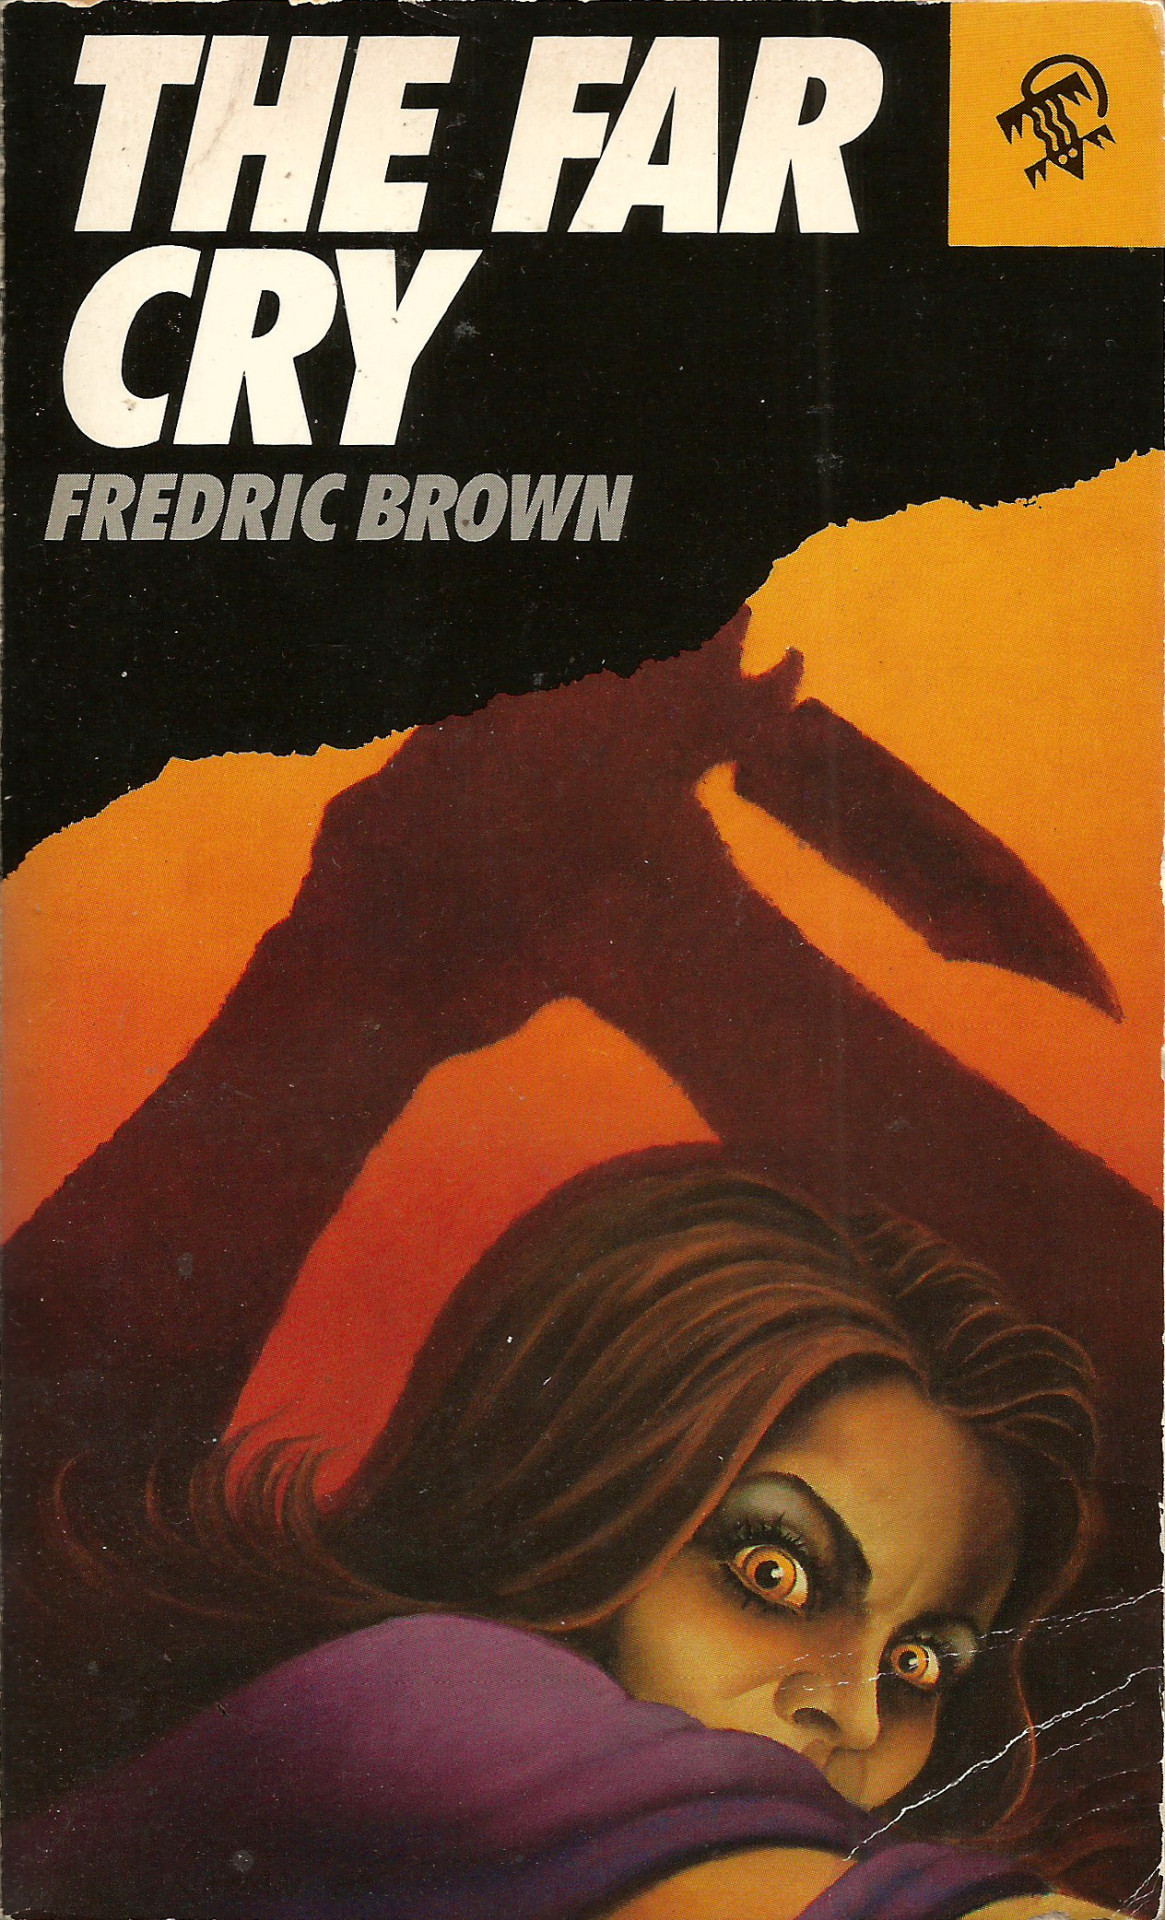 everythingsecondhand:The Far Cry, by Fredric Brown (Black Lizard Books, 1979). From